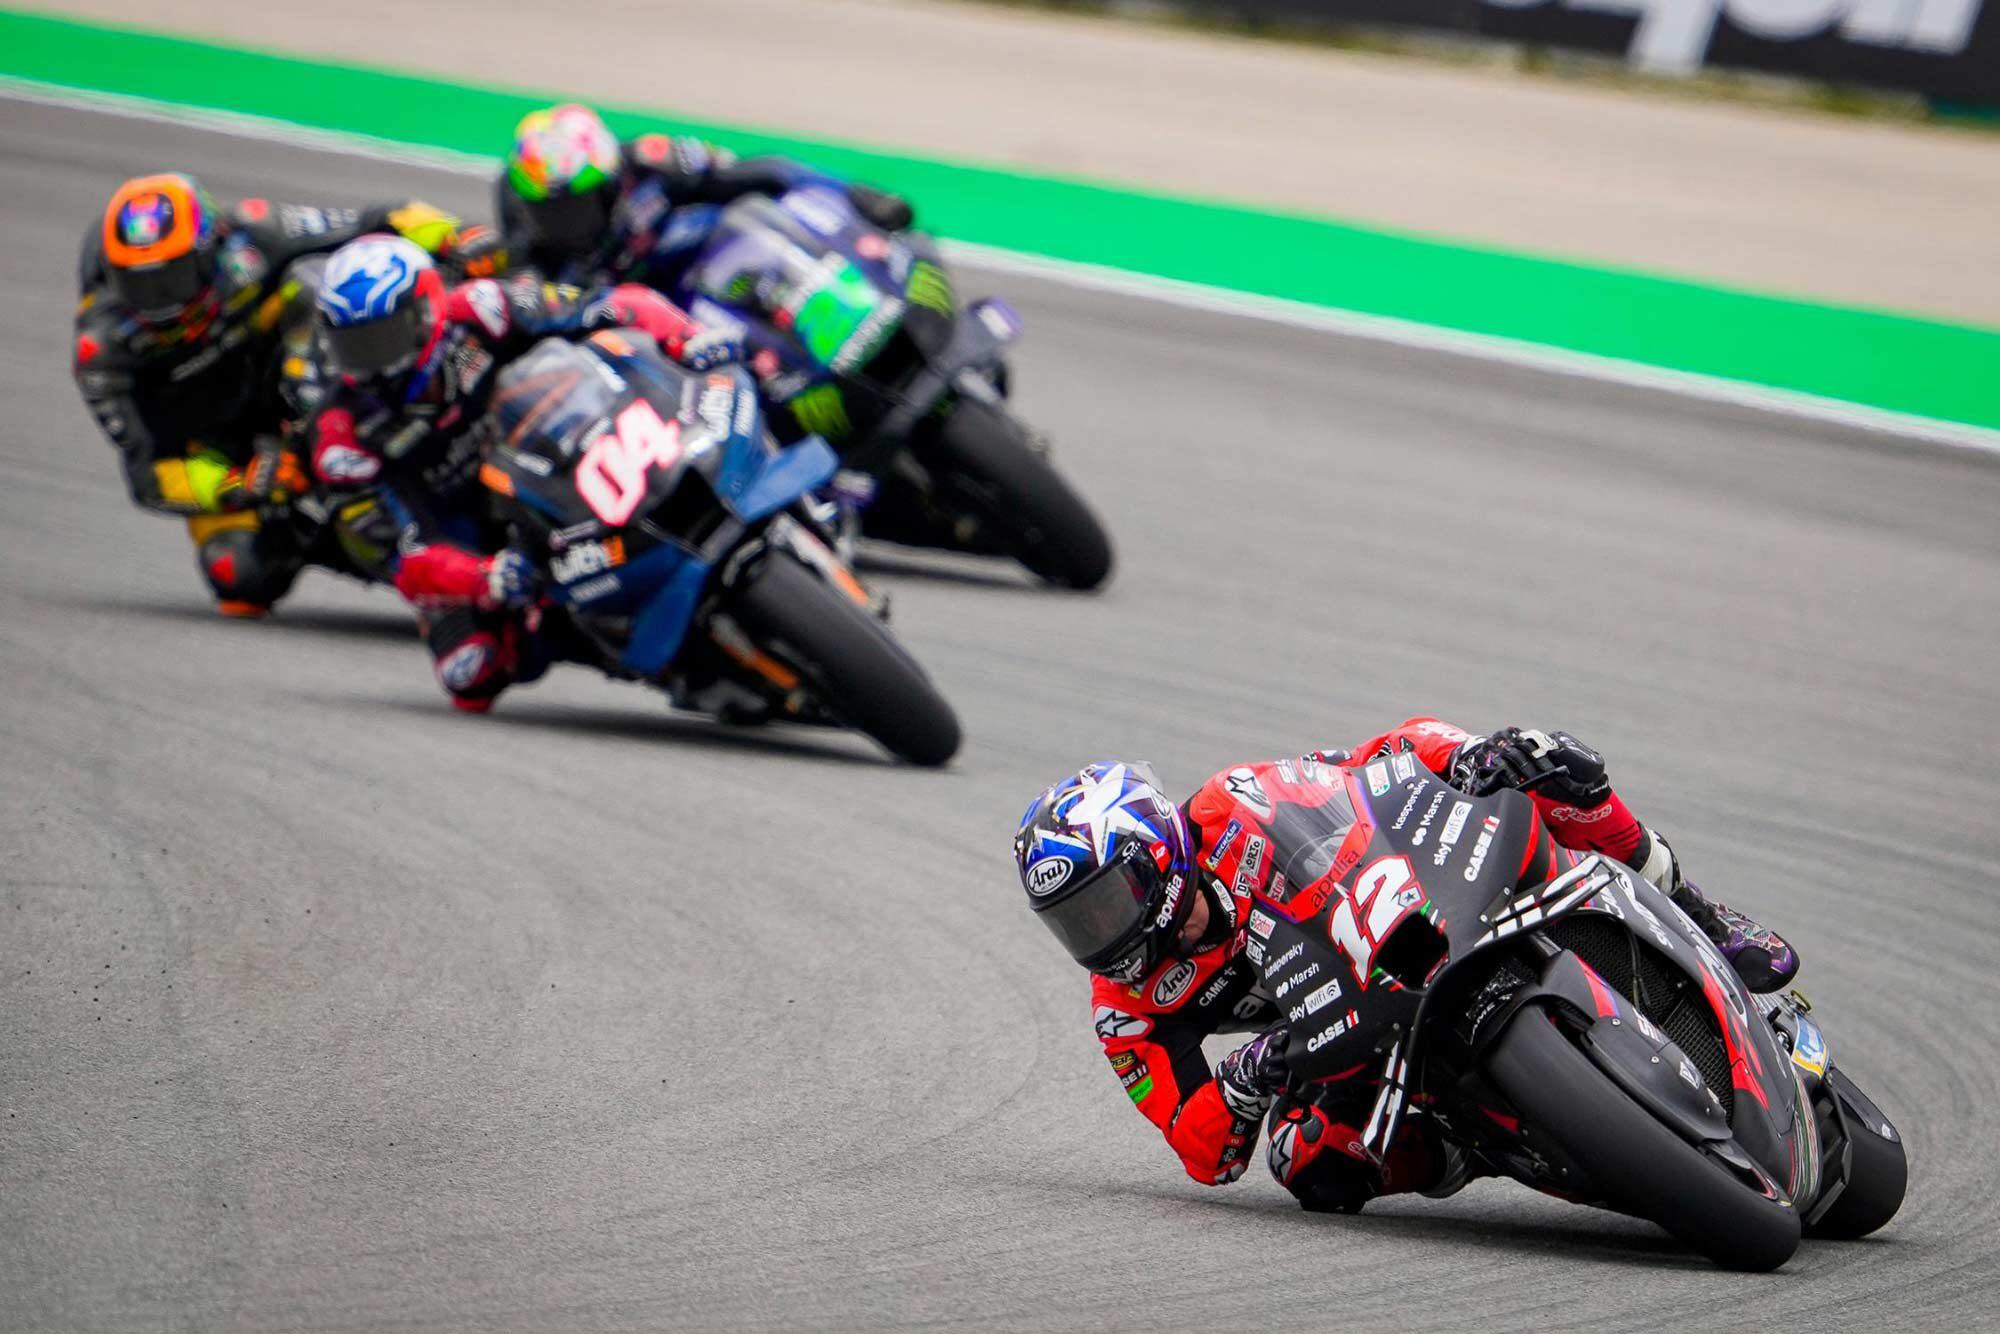 Aprilia’s Maverick Viñales rounded out the top 10 in the overall finishers, a classic example of a rider and bike whose strengths are not complementary.